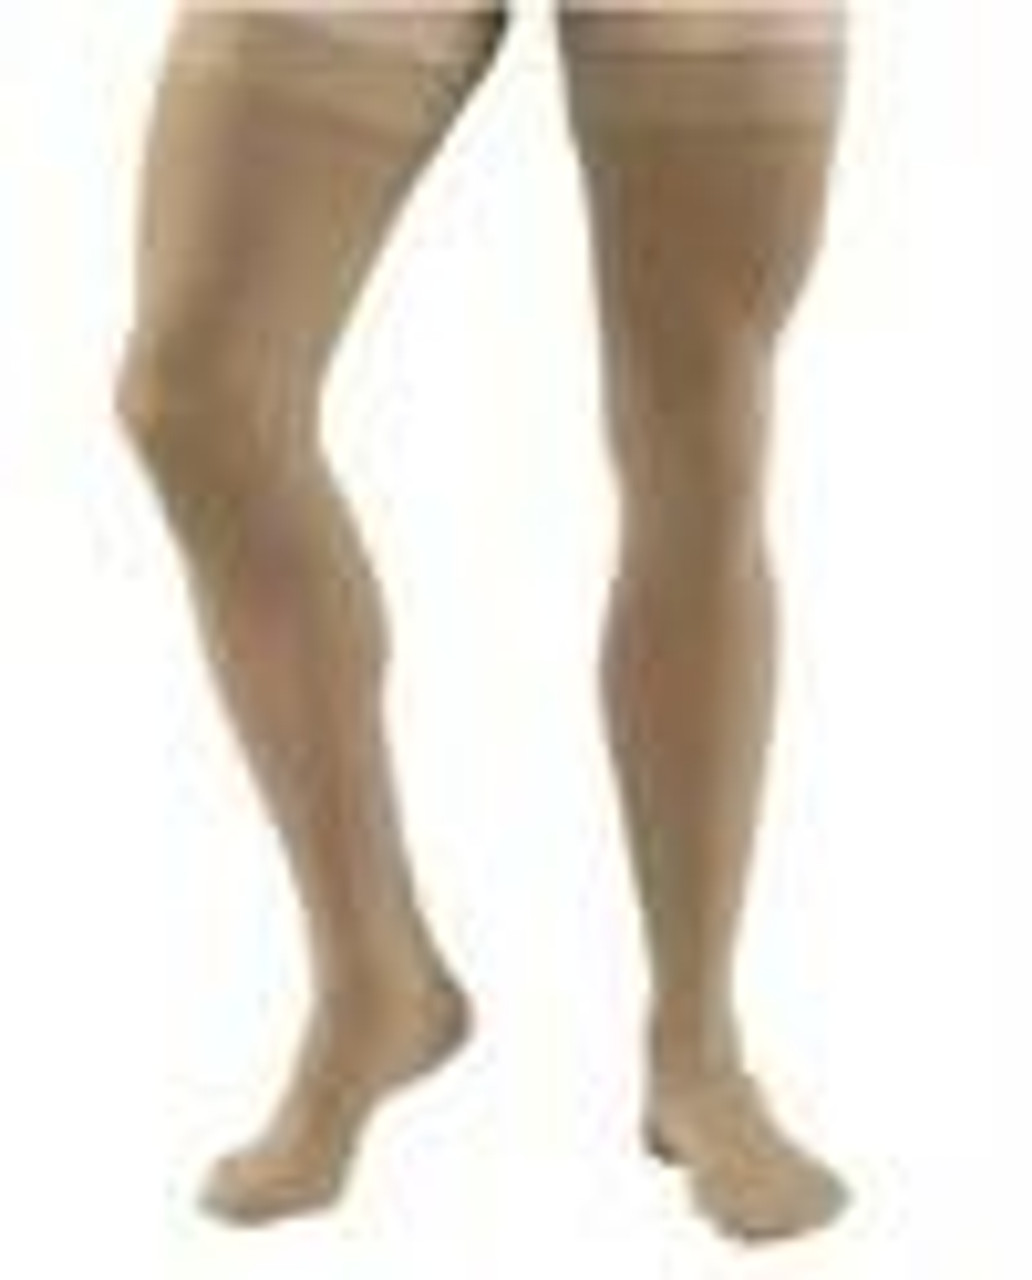 JOBST Relief 20-30 mmHg Compression Stockings, Waist High Pantyhose, Open  Toe, Beige, Small — HV Supply